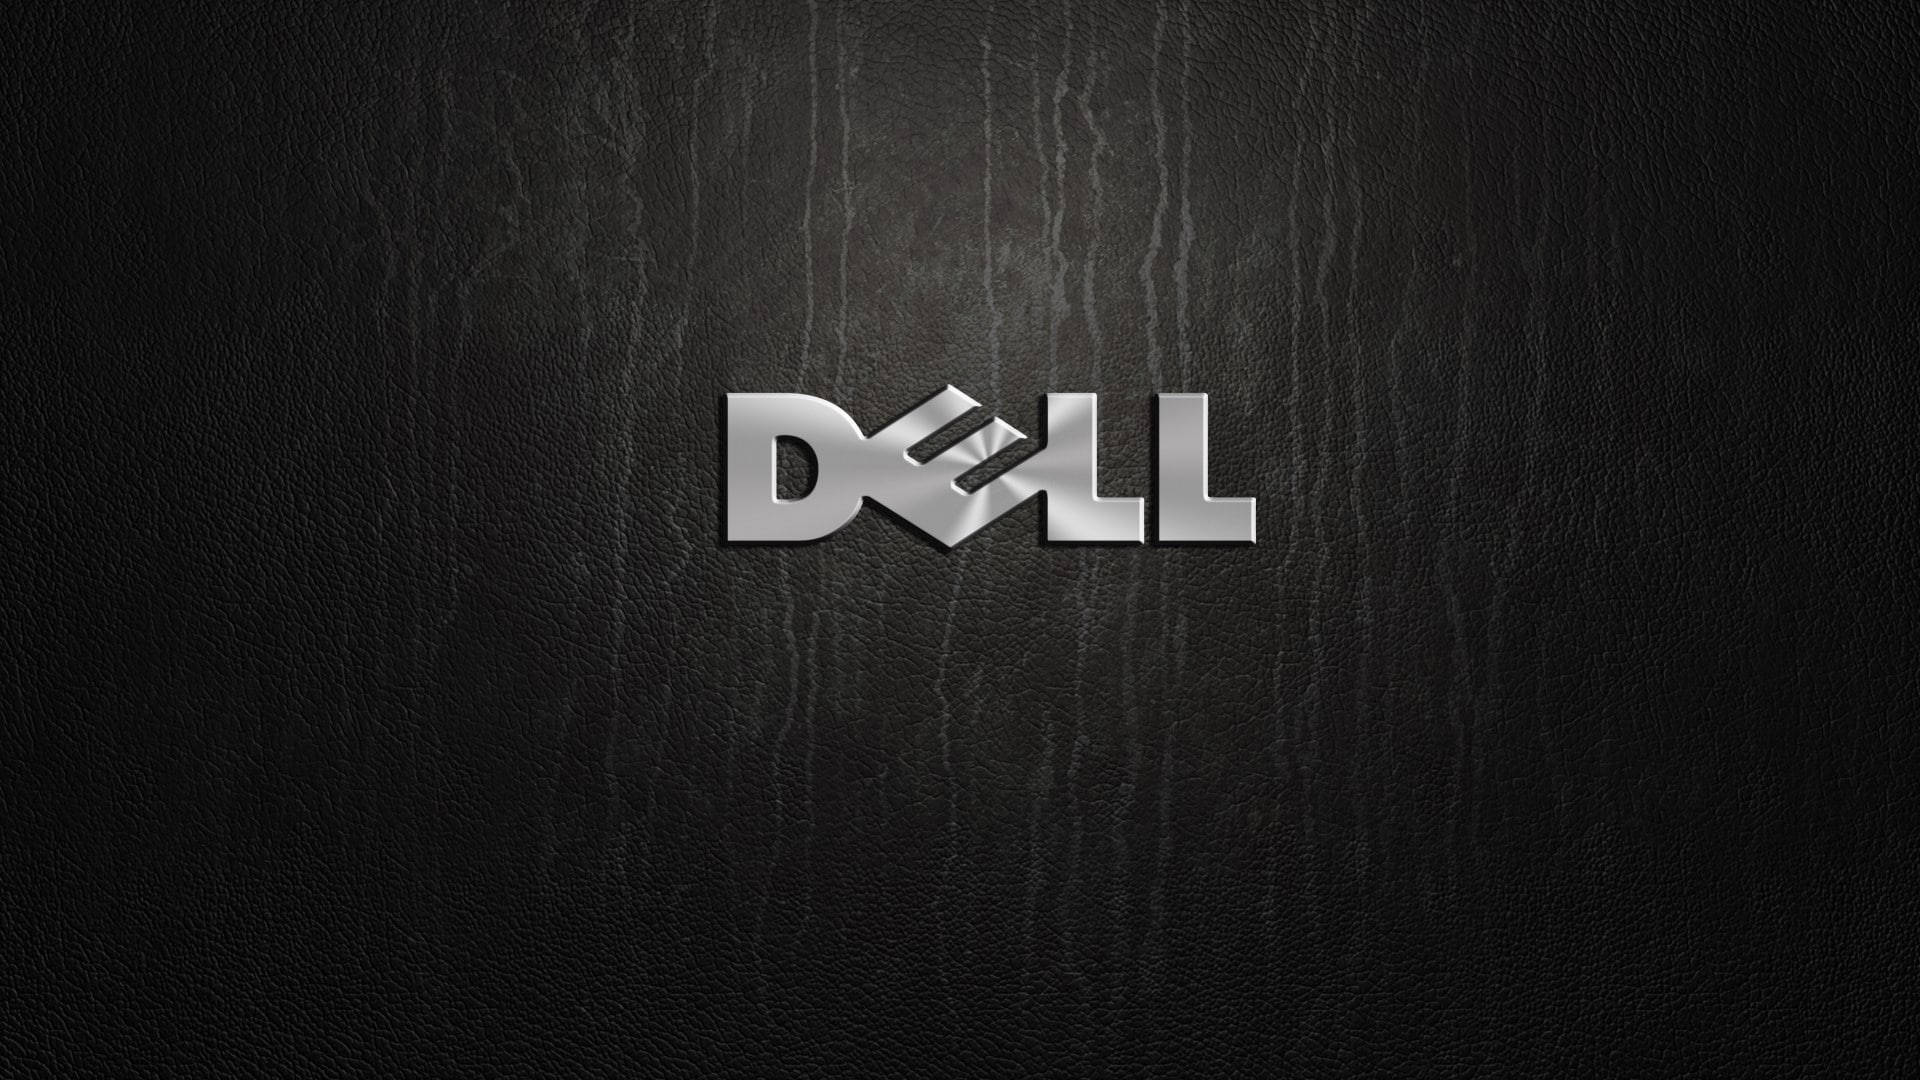 Dell Laptop Logo Stained Background